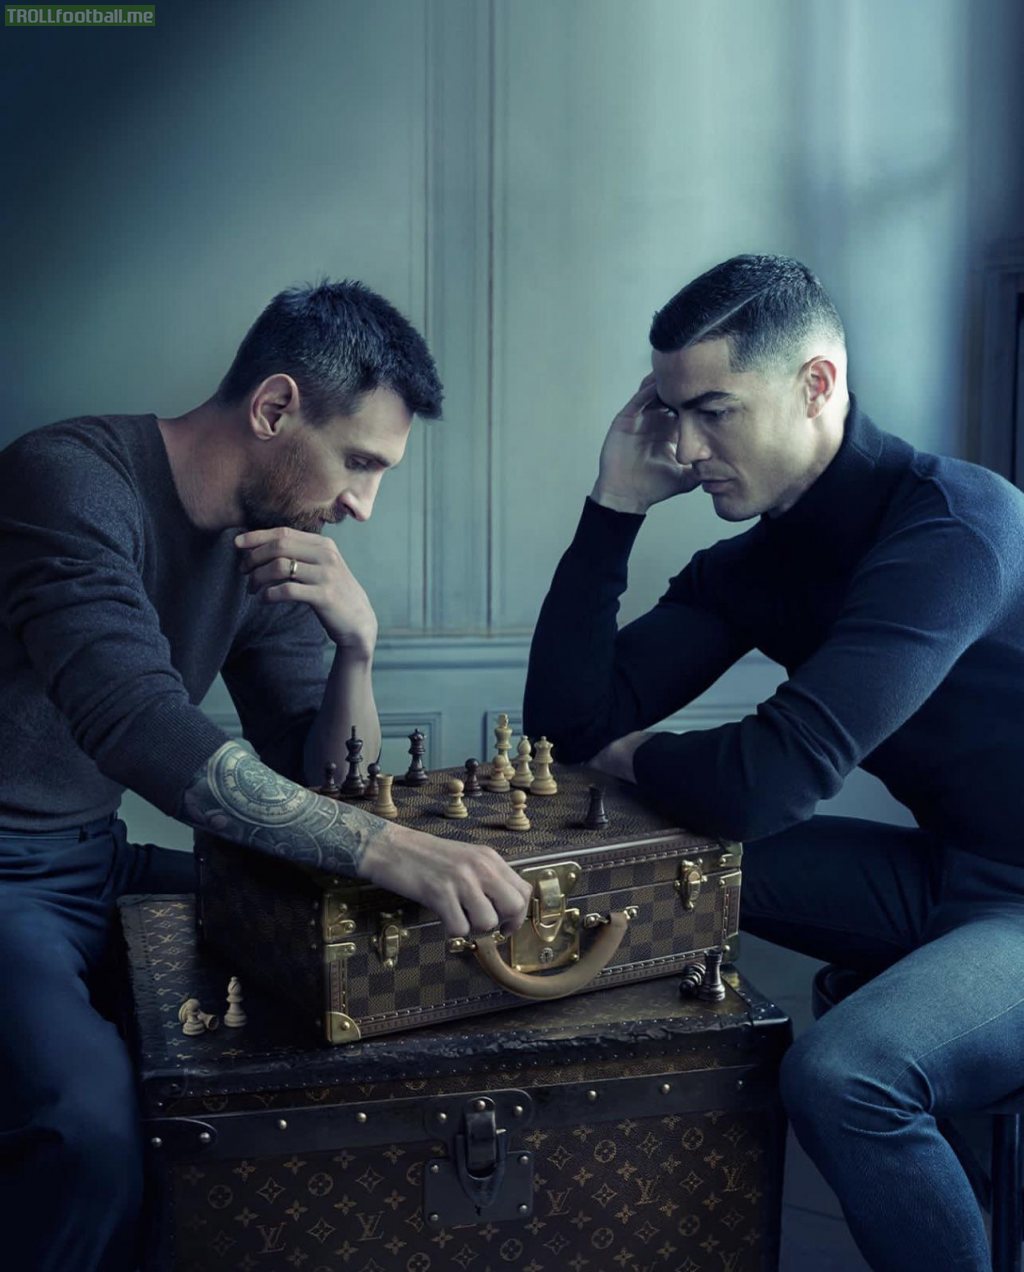 Lionel Messi and Cristiano Ronaldo together for a Louis Vuitton campaign, captured by Annie Leibovitz.